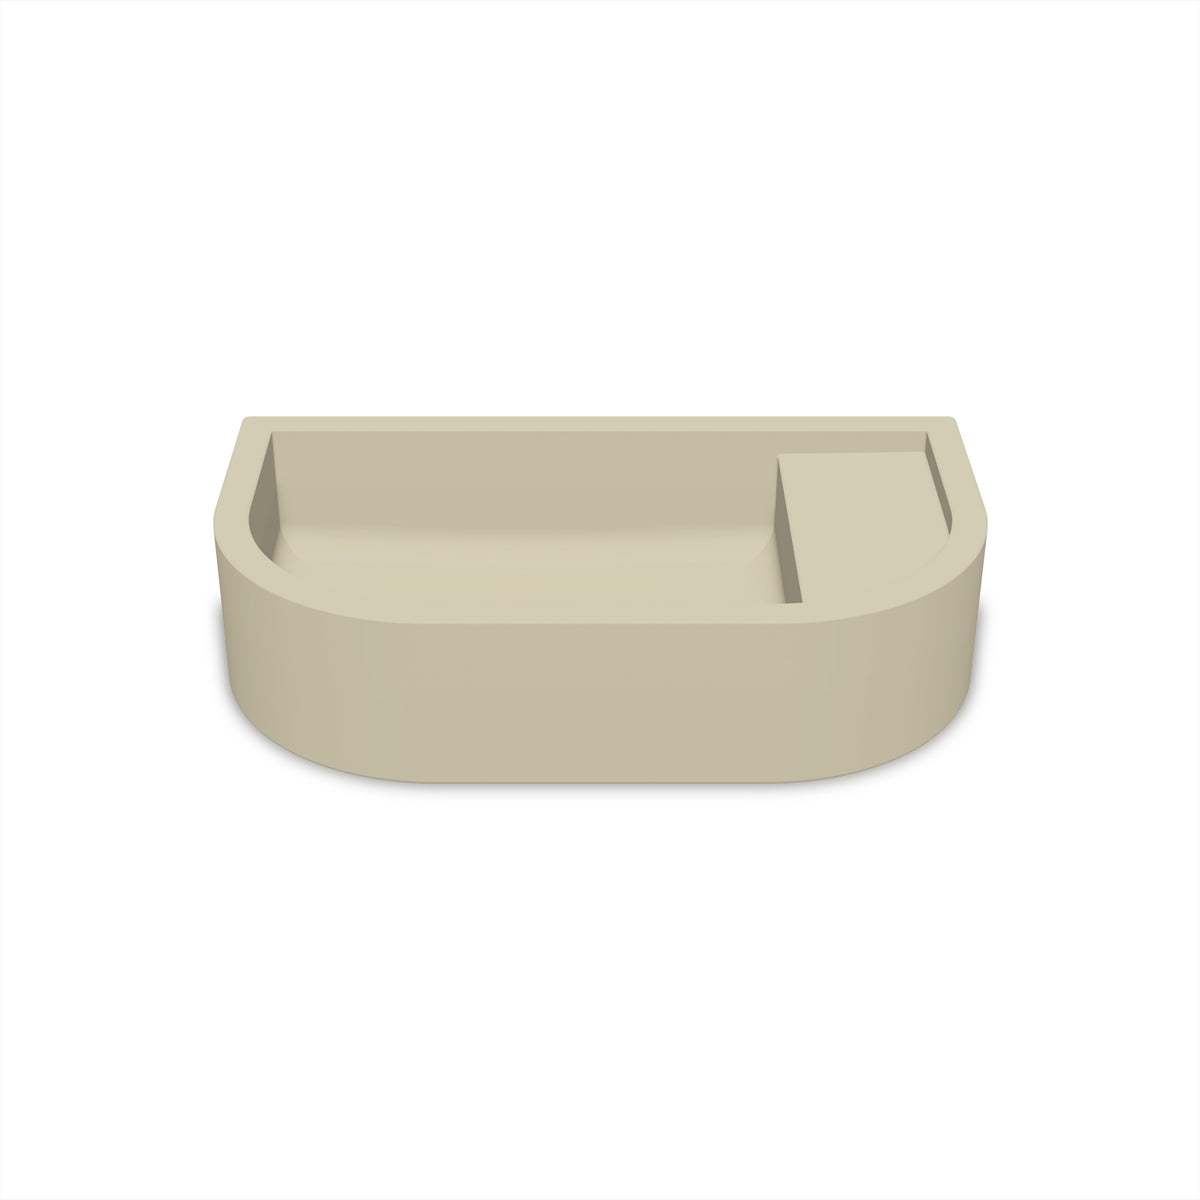 Loop 02 Basin - Overflow - Surface Mount (Sand,No Tap Hole,White)